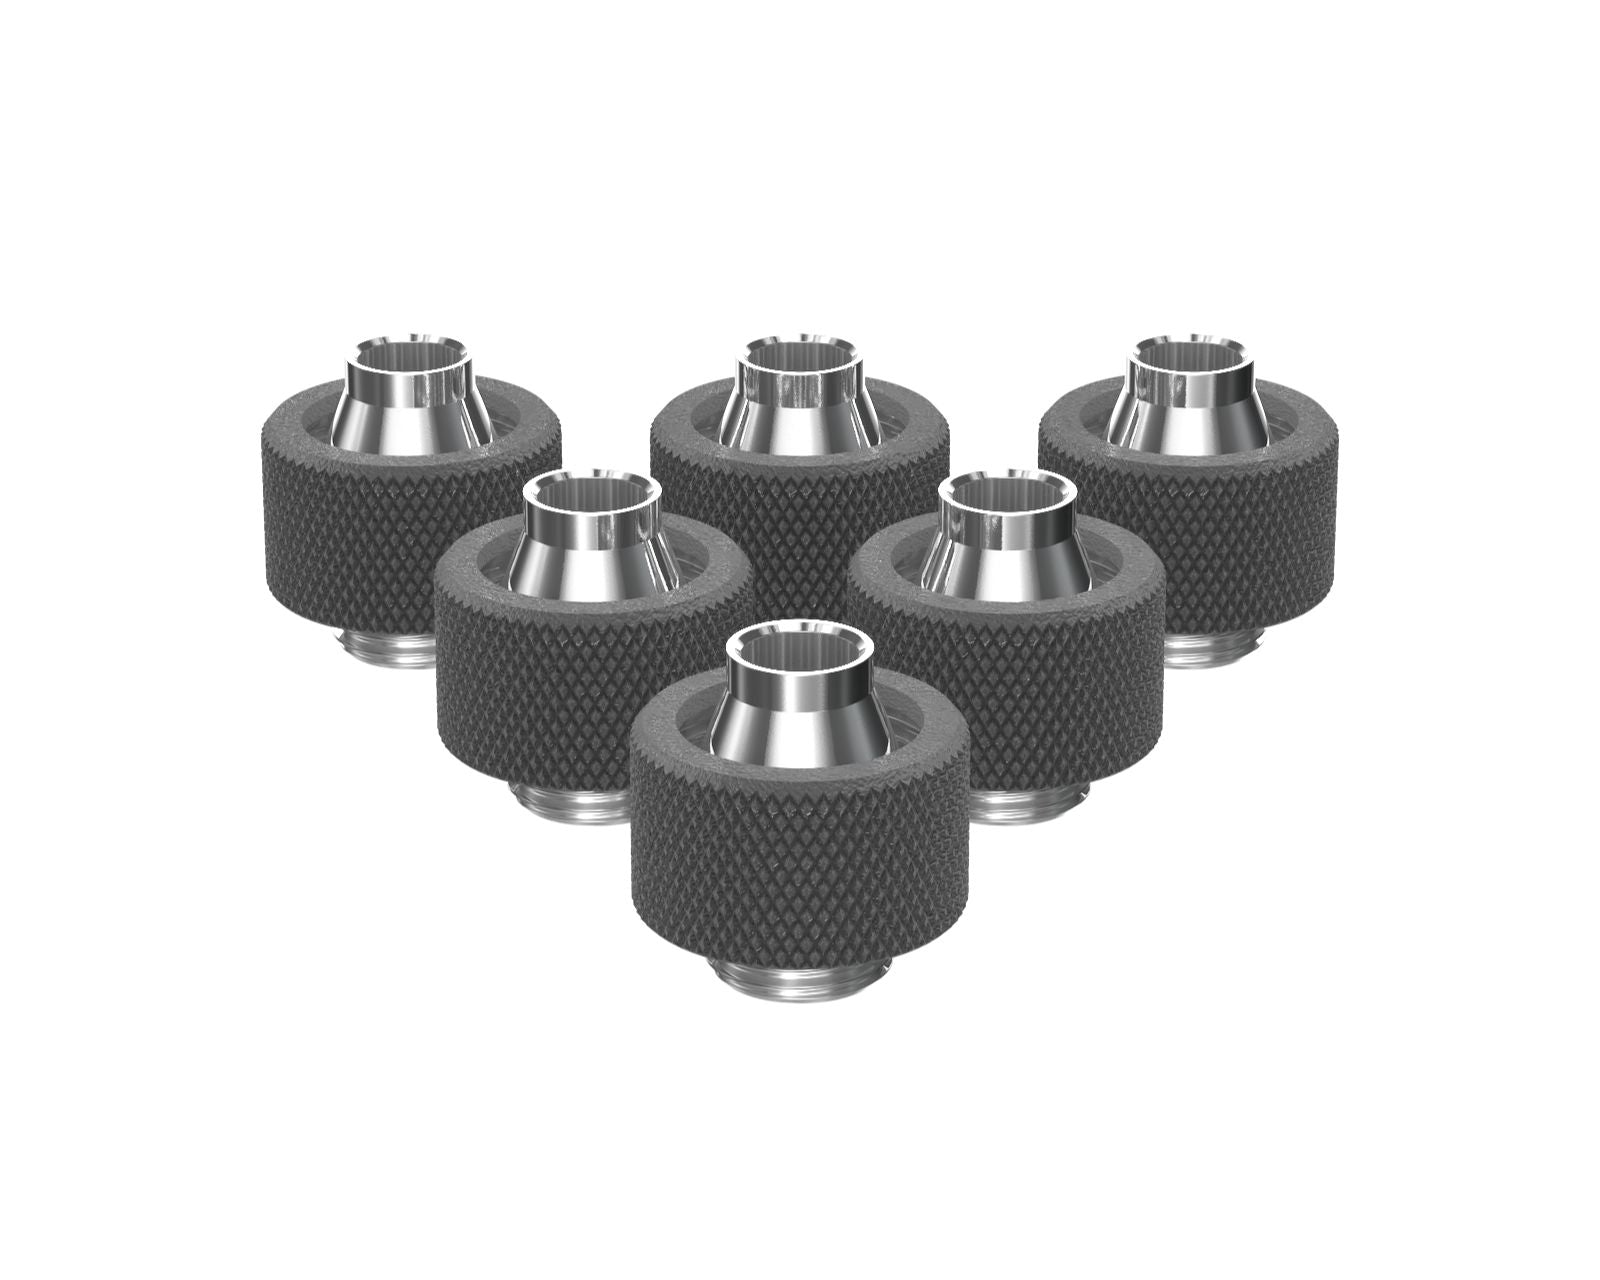 PrimoChill SecureFit SX - Premium Compression Fitting For 7/16in ID x 5/8in OD Flexible Tubing 6 Pack (F-SFSX758-6) - Available in 20+ Colors, Custom Watercooling Loop Ready - TX Matte Gun Metal